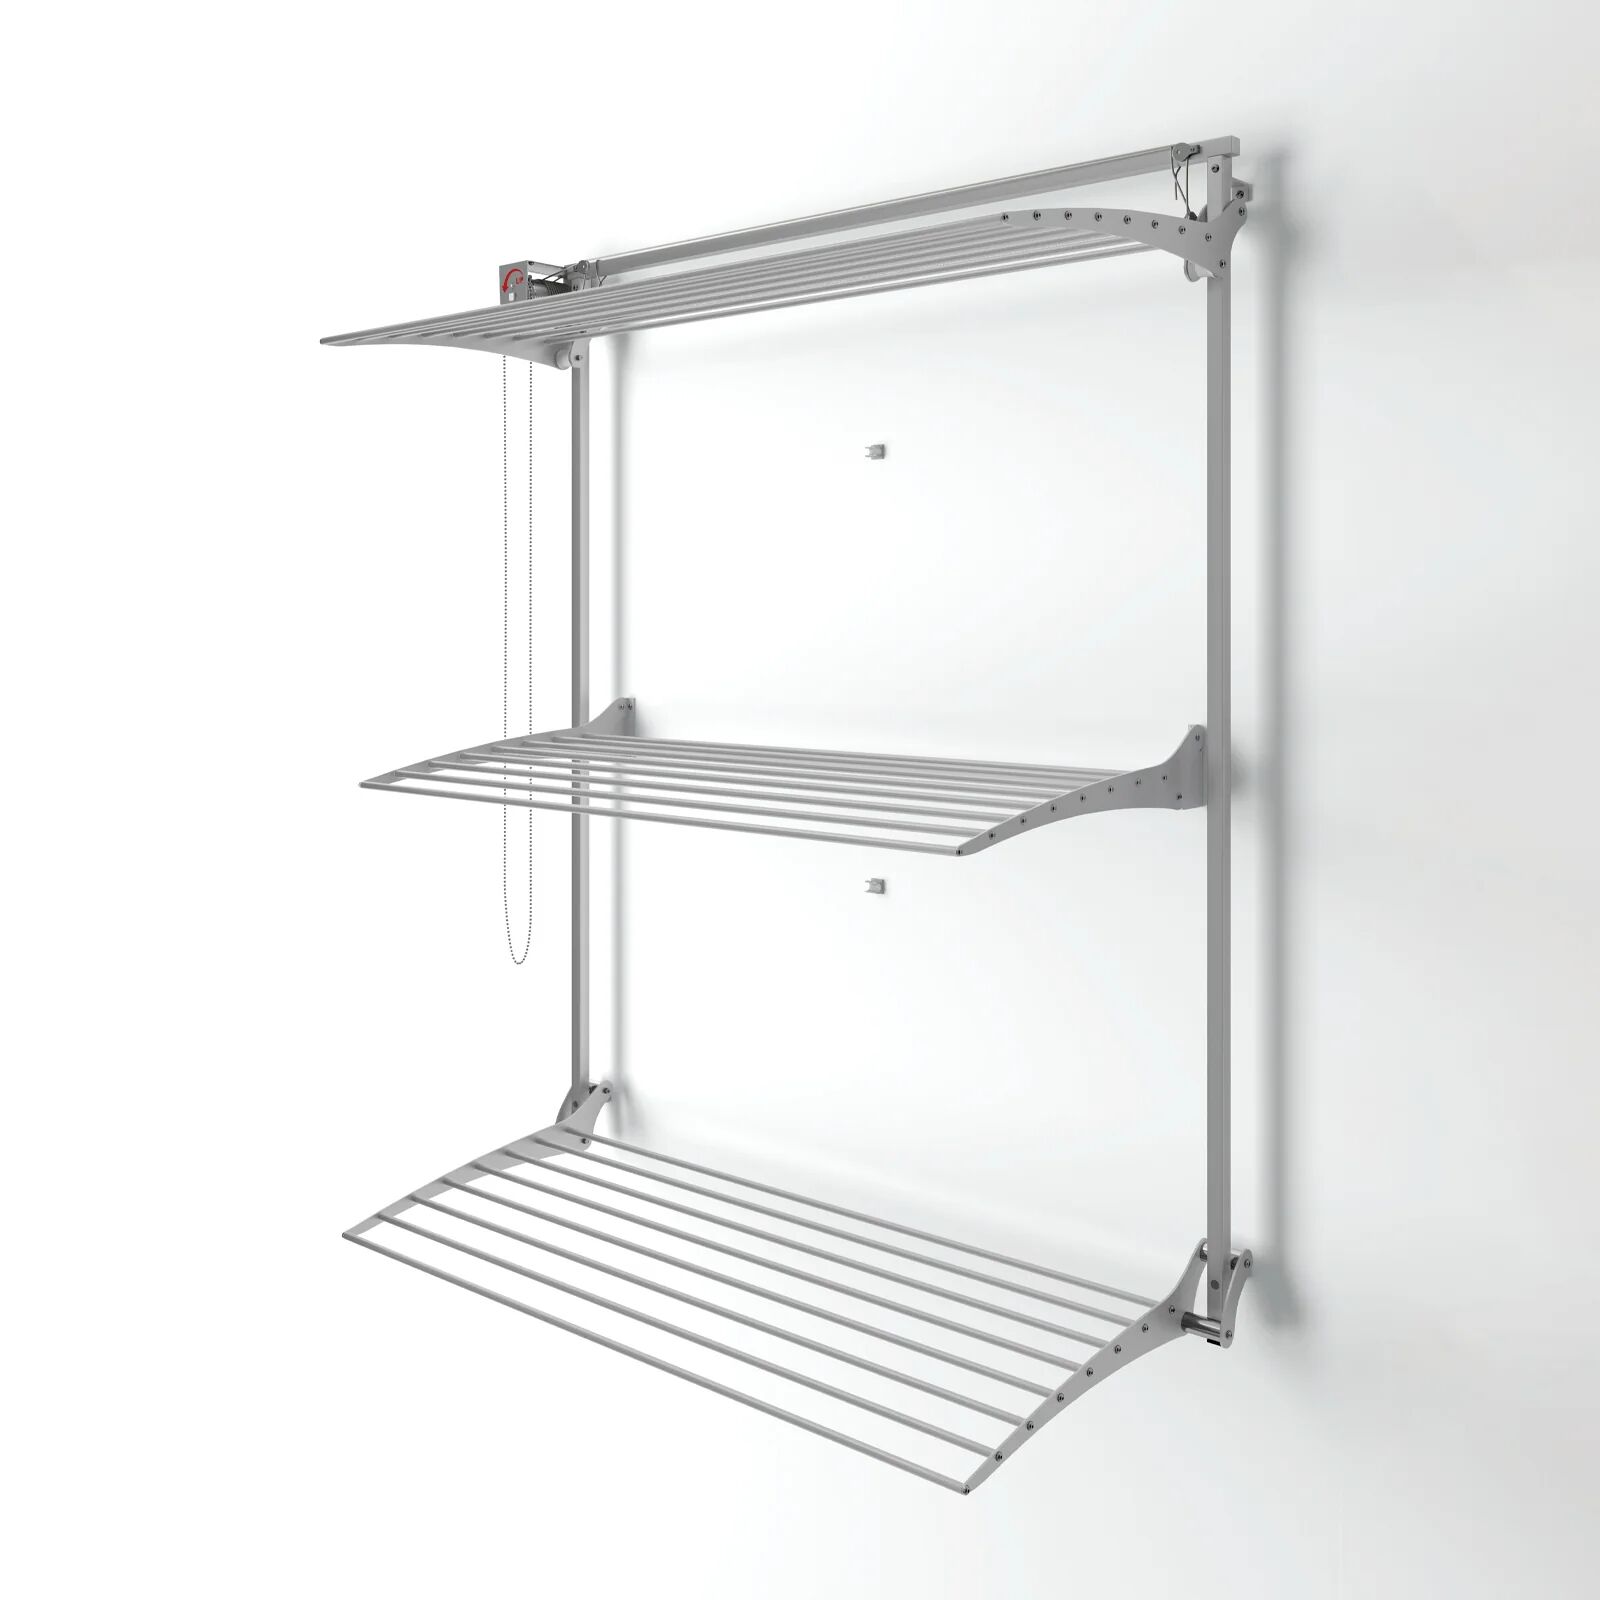 Foxydry Tower 100 tower clothes airer with foldable racks